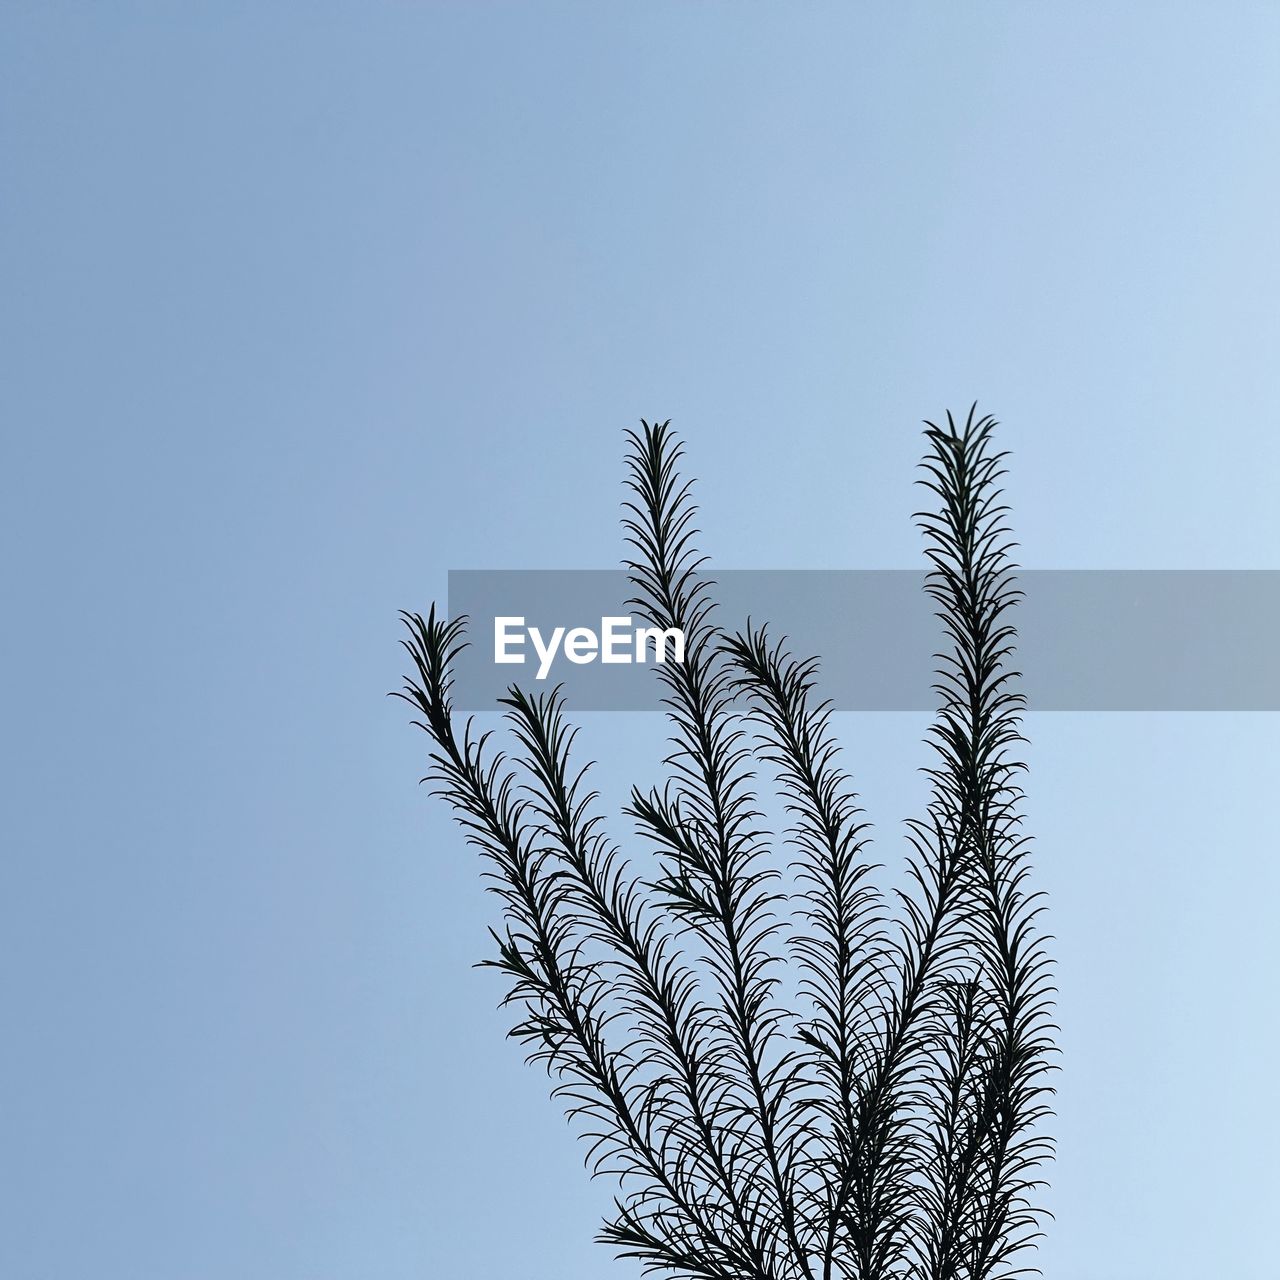 LOW ANGLE VIEW OF PLANT AGAINST SKY